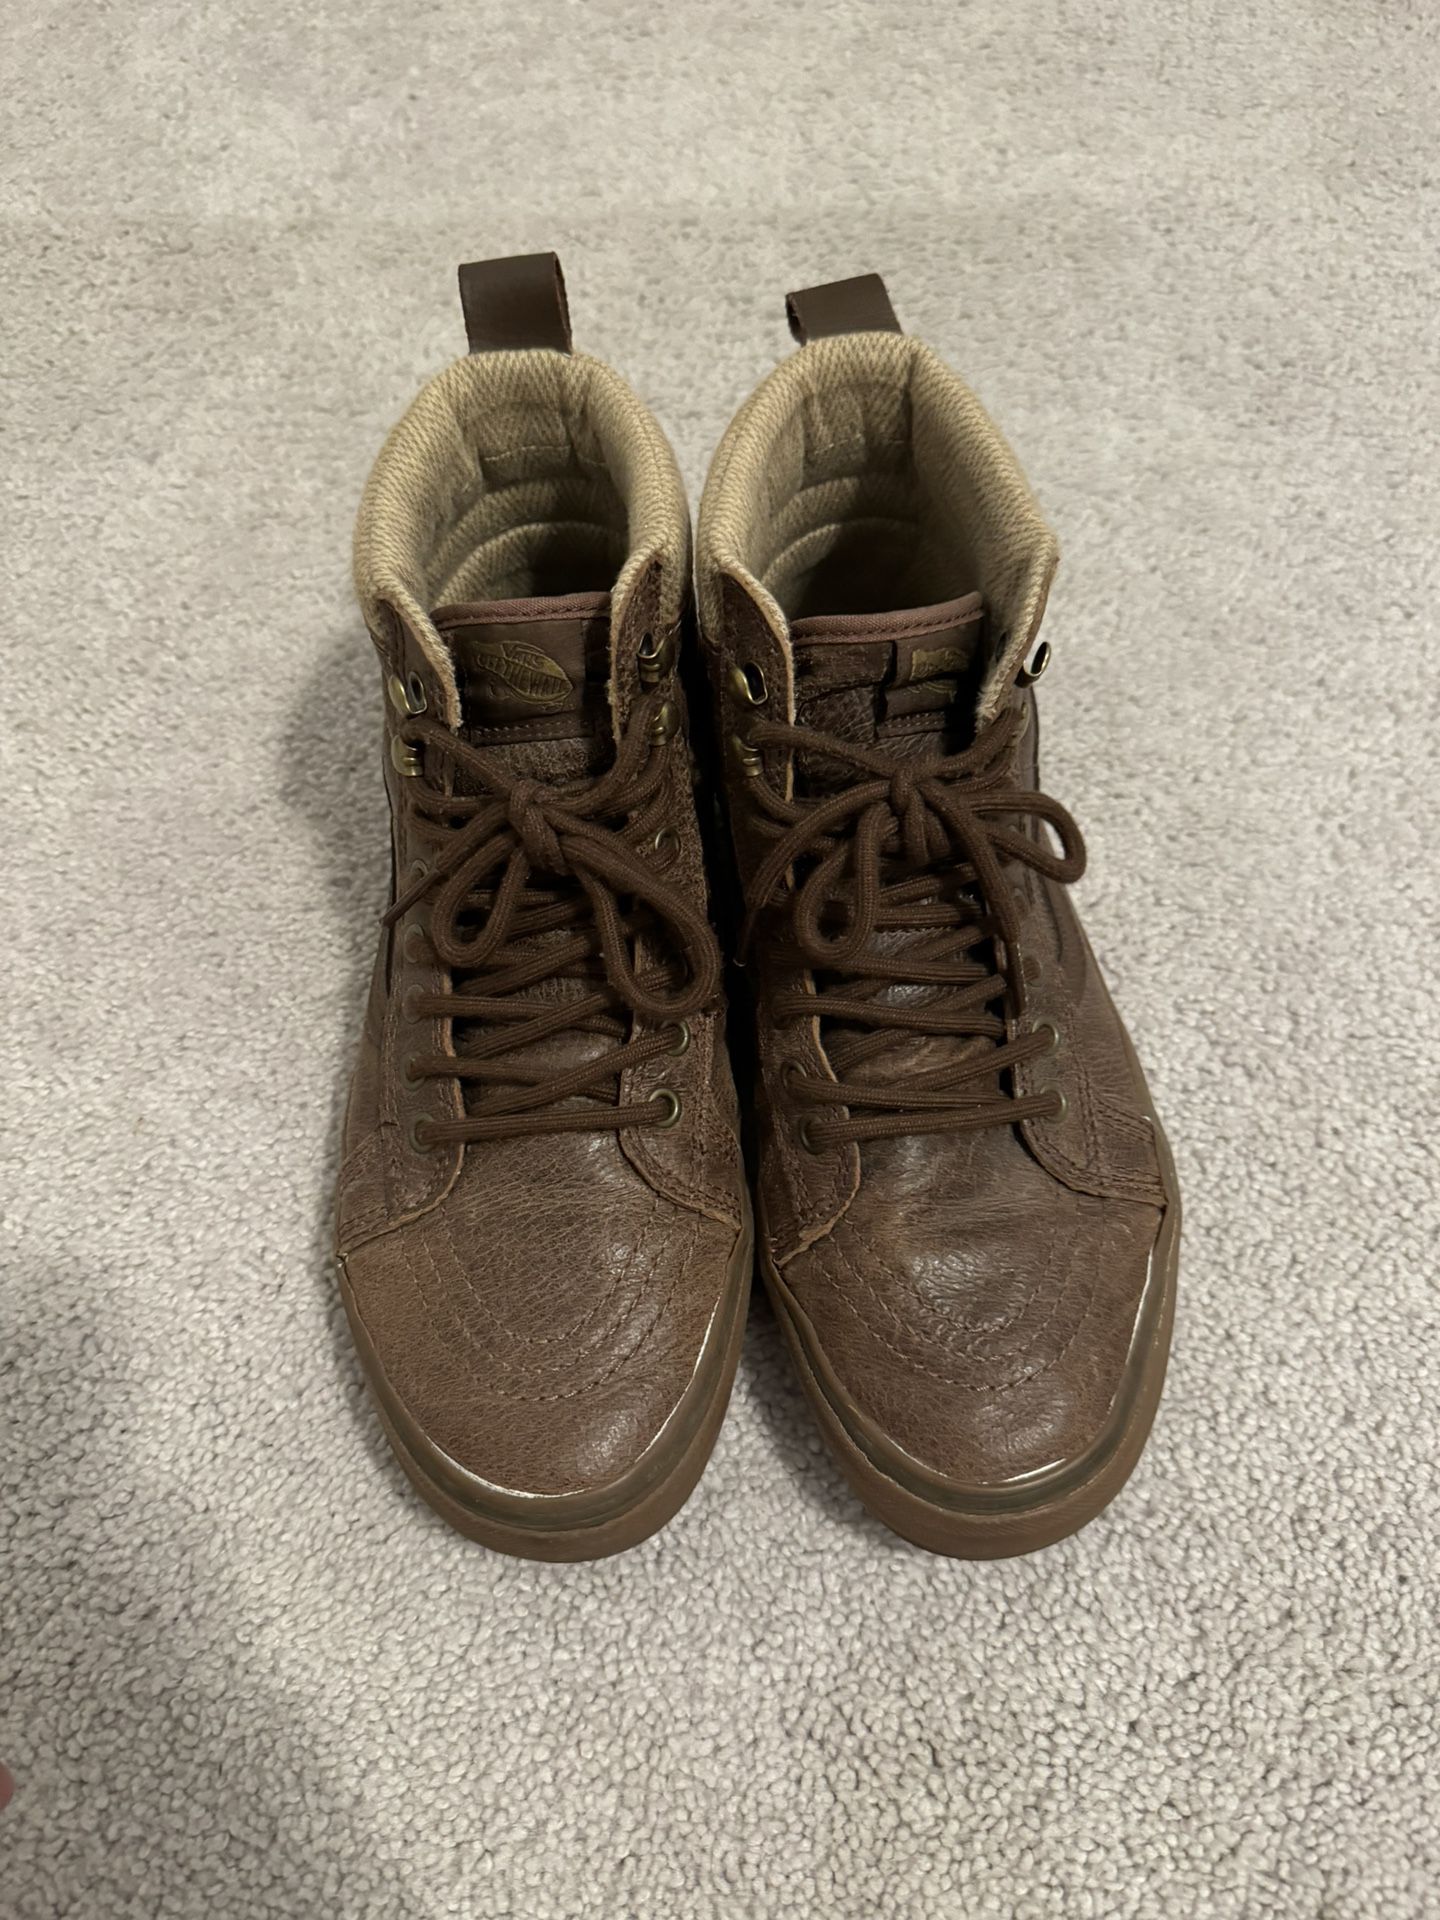 Vans High Tops (Brown) - Like New - Size 9